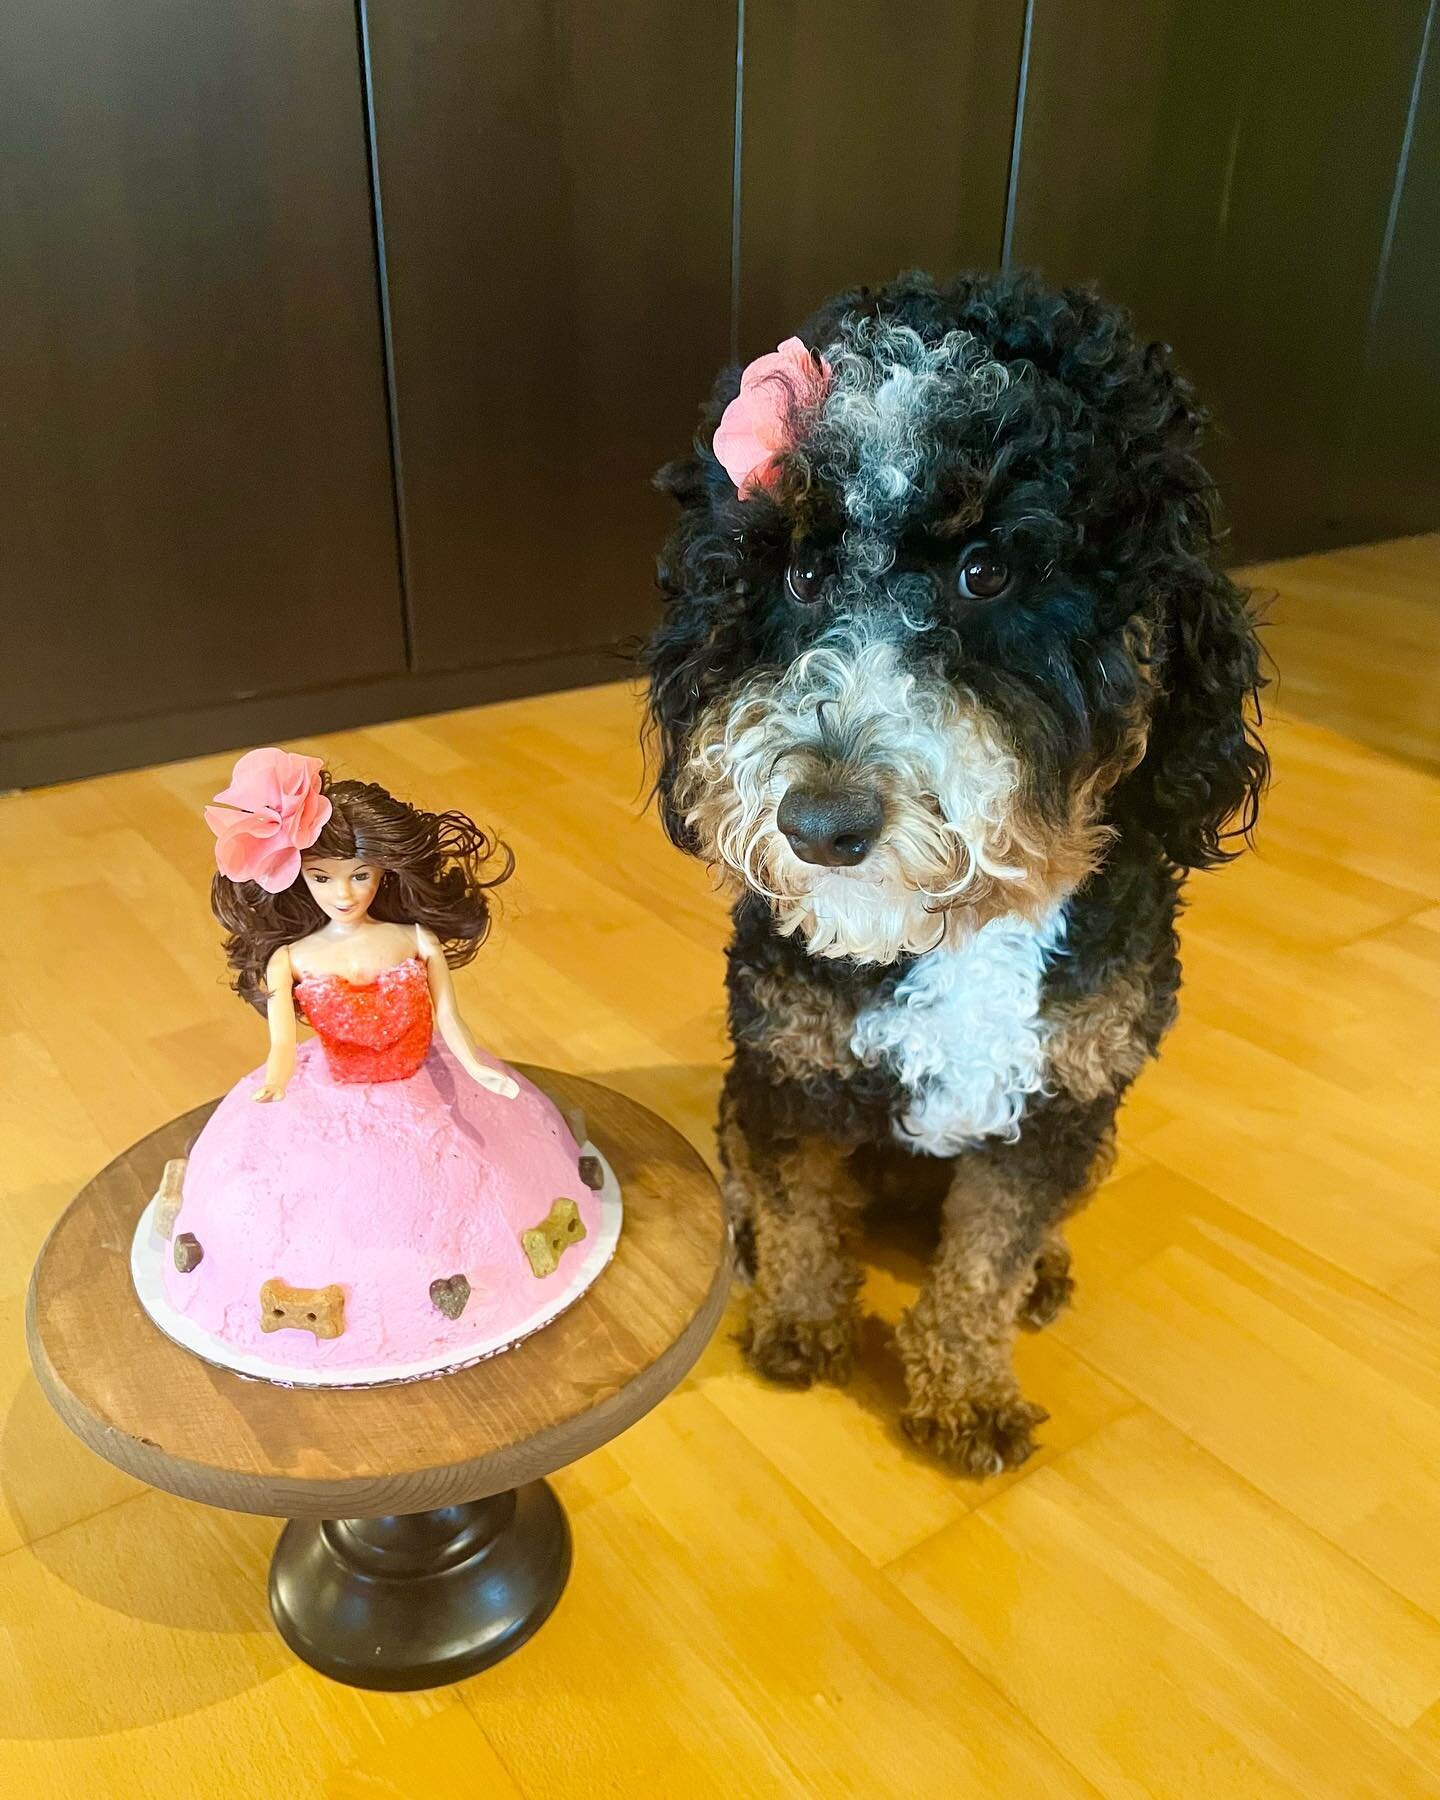 This Barbie is a princess pup! 👸🏽
Swipe to see the pup cake!

We made a special dog cake for a one year old bernedoodle pup!  Happy birthday Summer! We love you! 💕